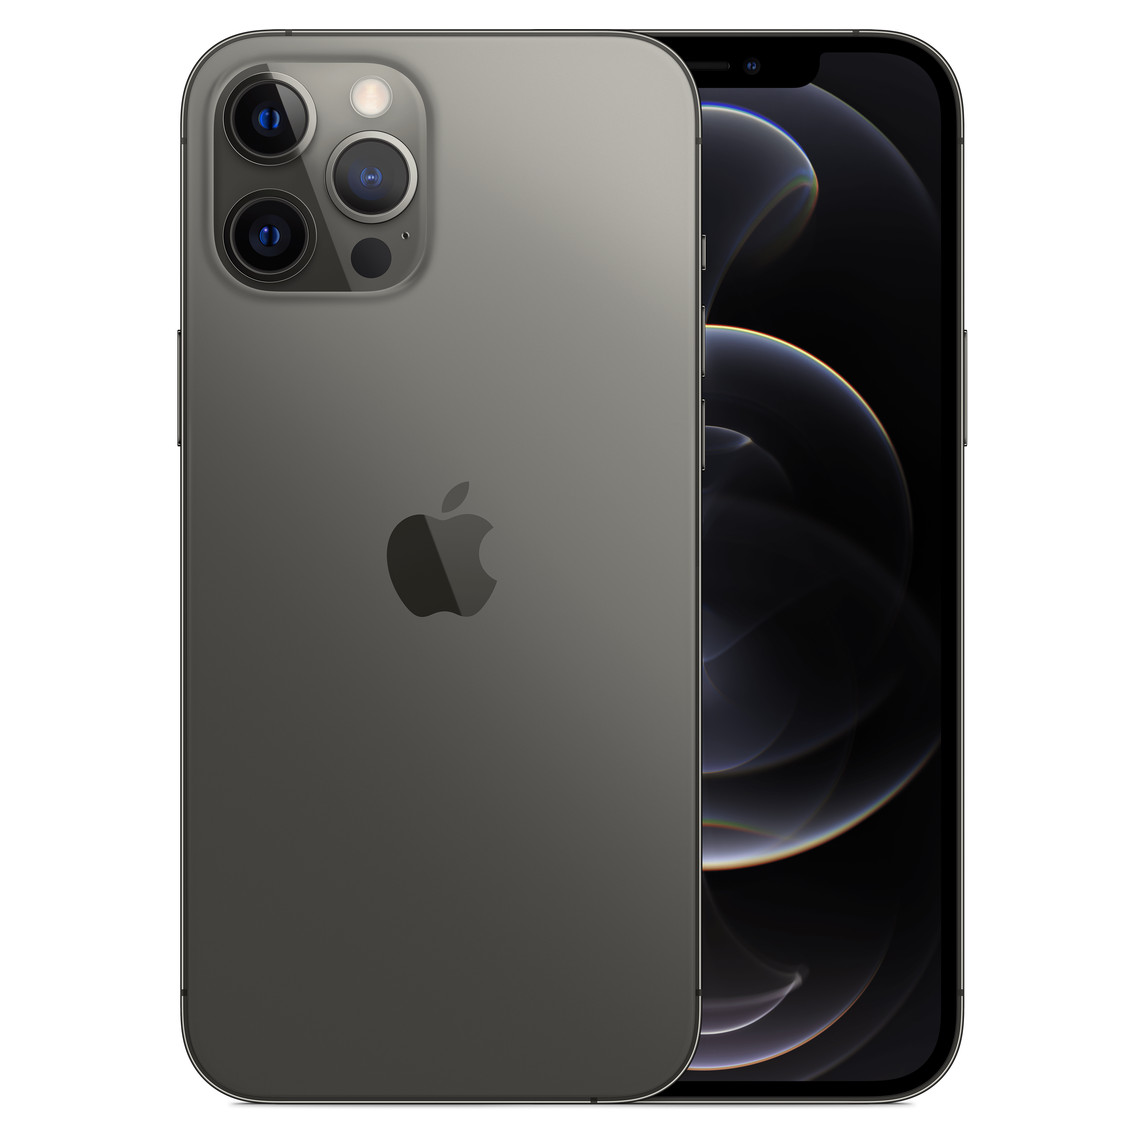 Back, gray iPhone 12 Pro Max, Pro camera system with True Tone flash, microphone. Front, all-screen display